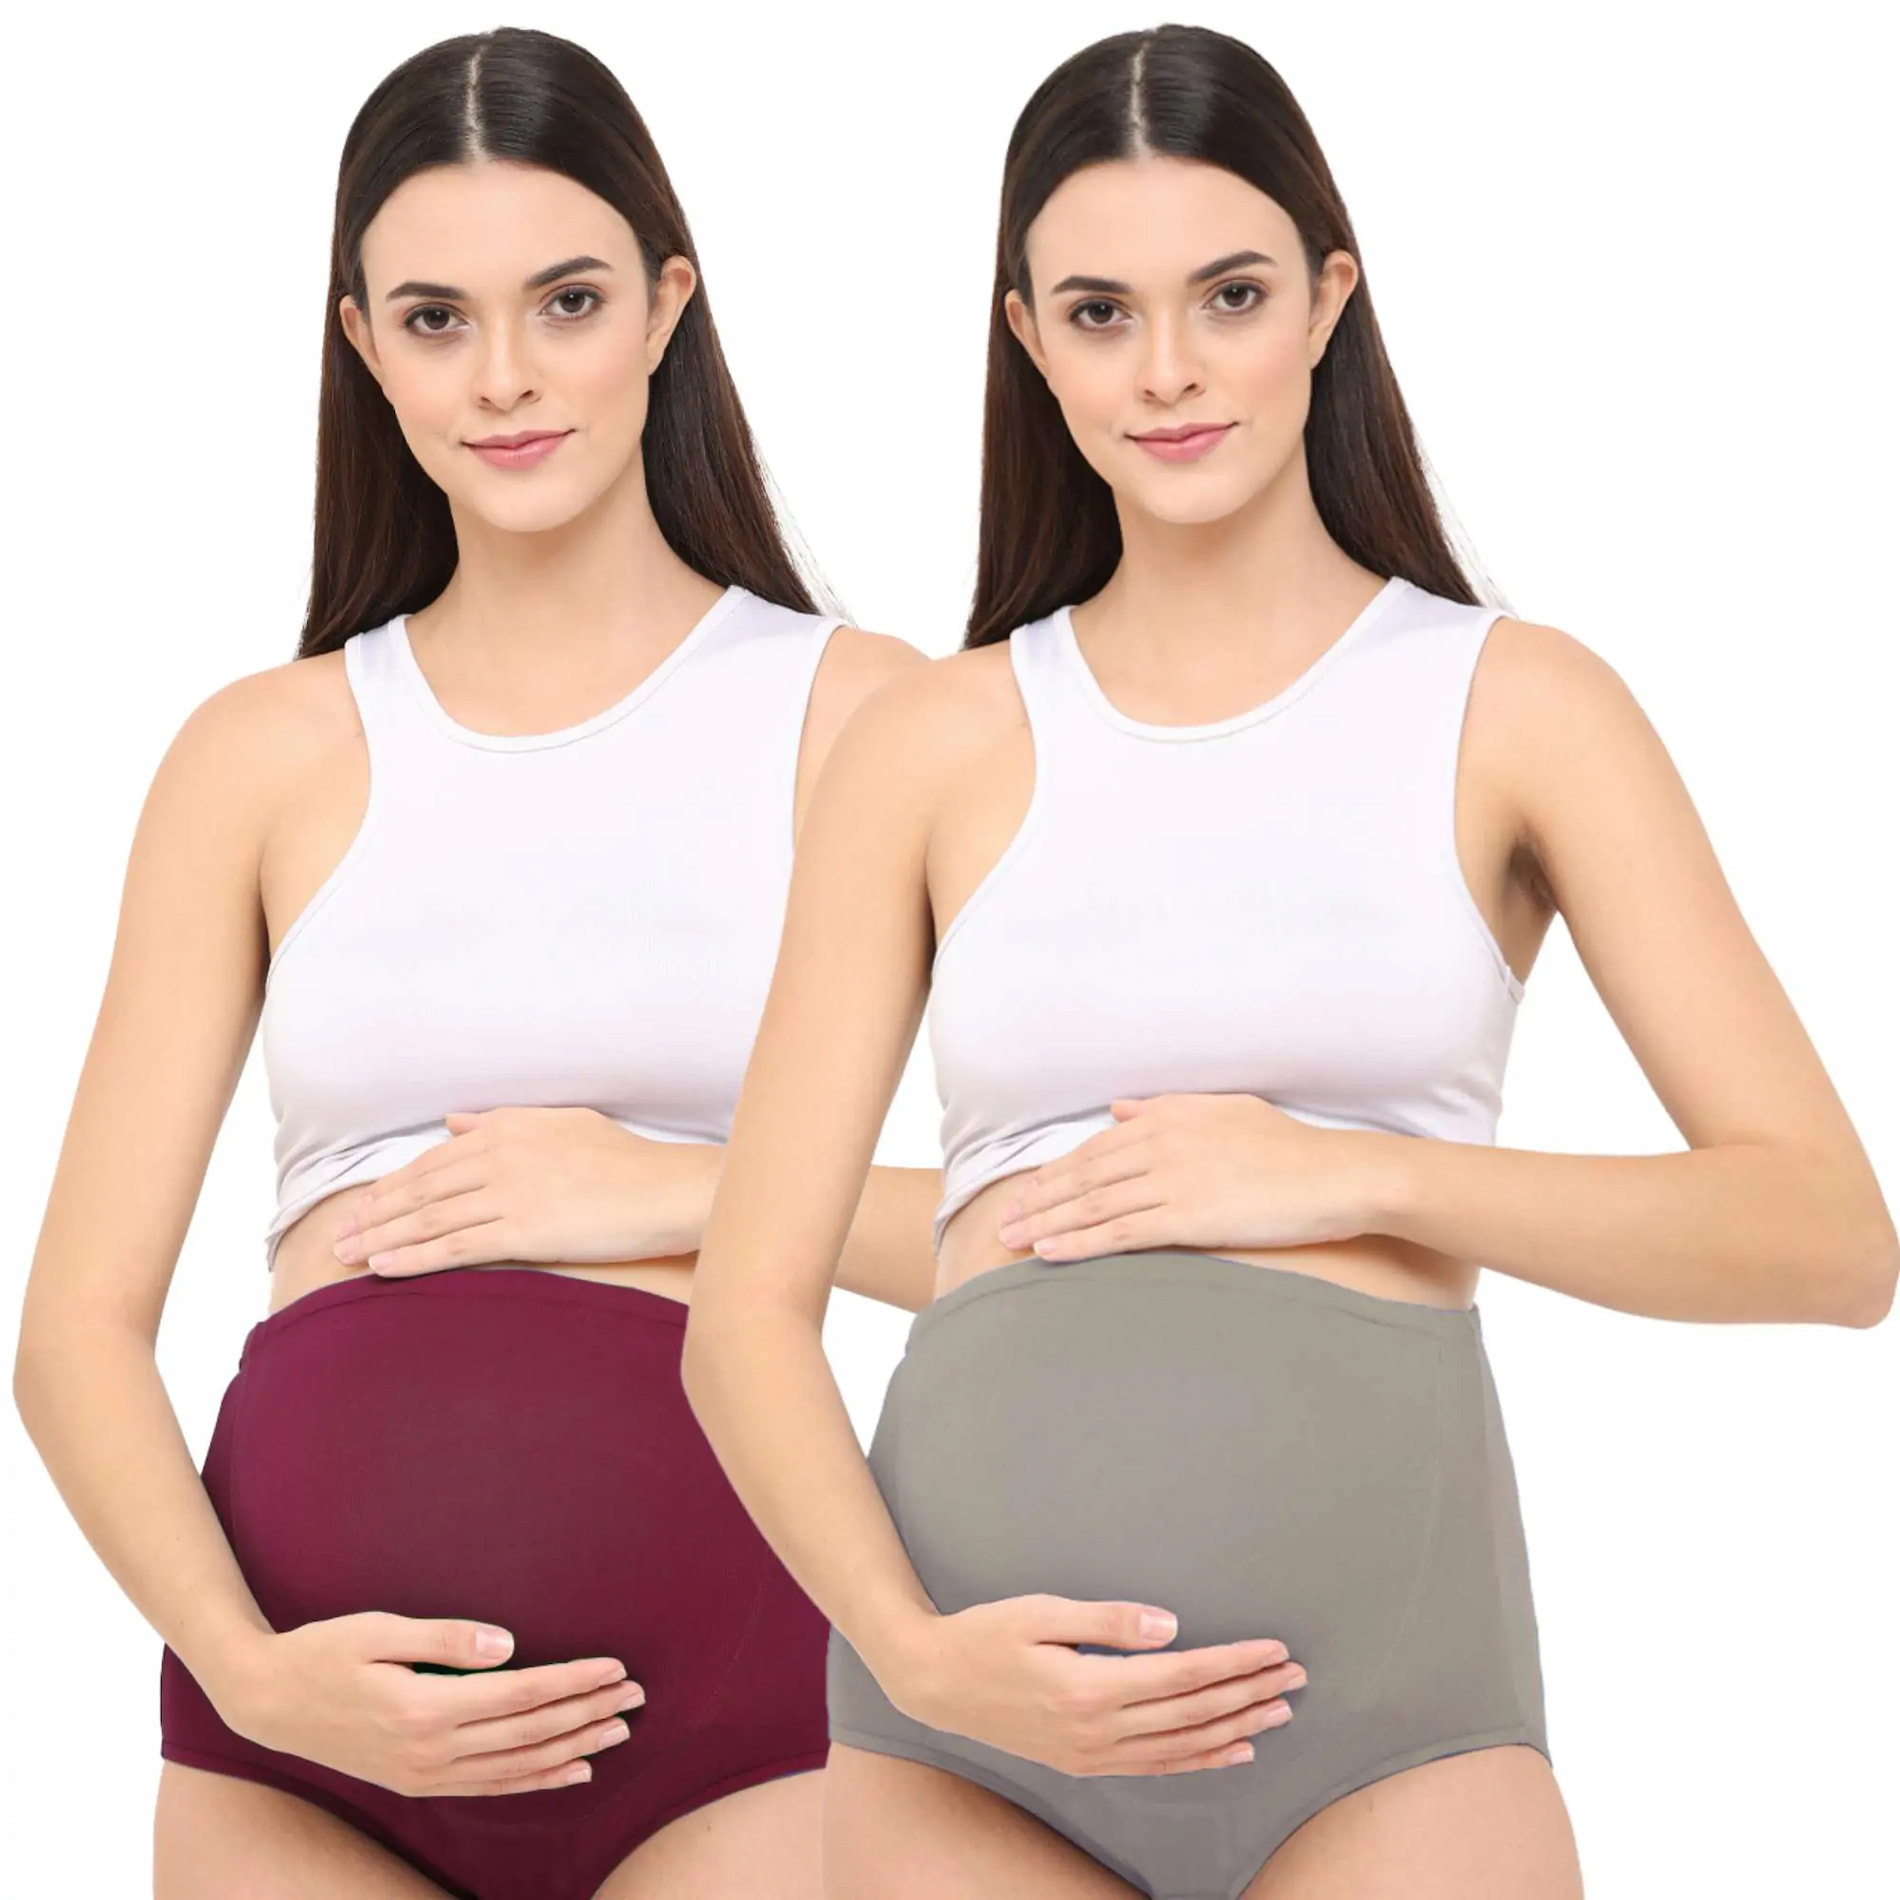 Mylo High Waist Maternity/Postpartum Panty - Anti-Microbial with Comfy Adjustable Waistband-  Cloud Grey & Ruby Wine-M-Pack of 2 